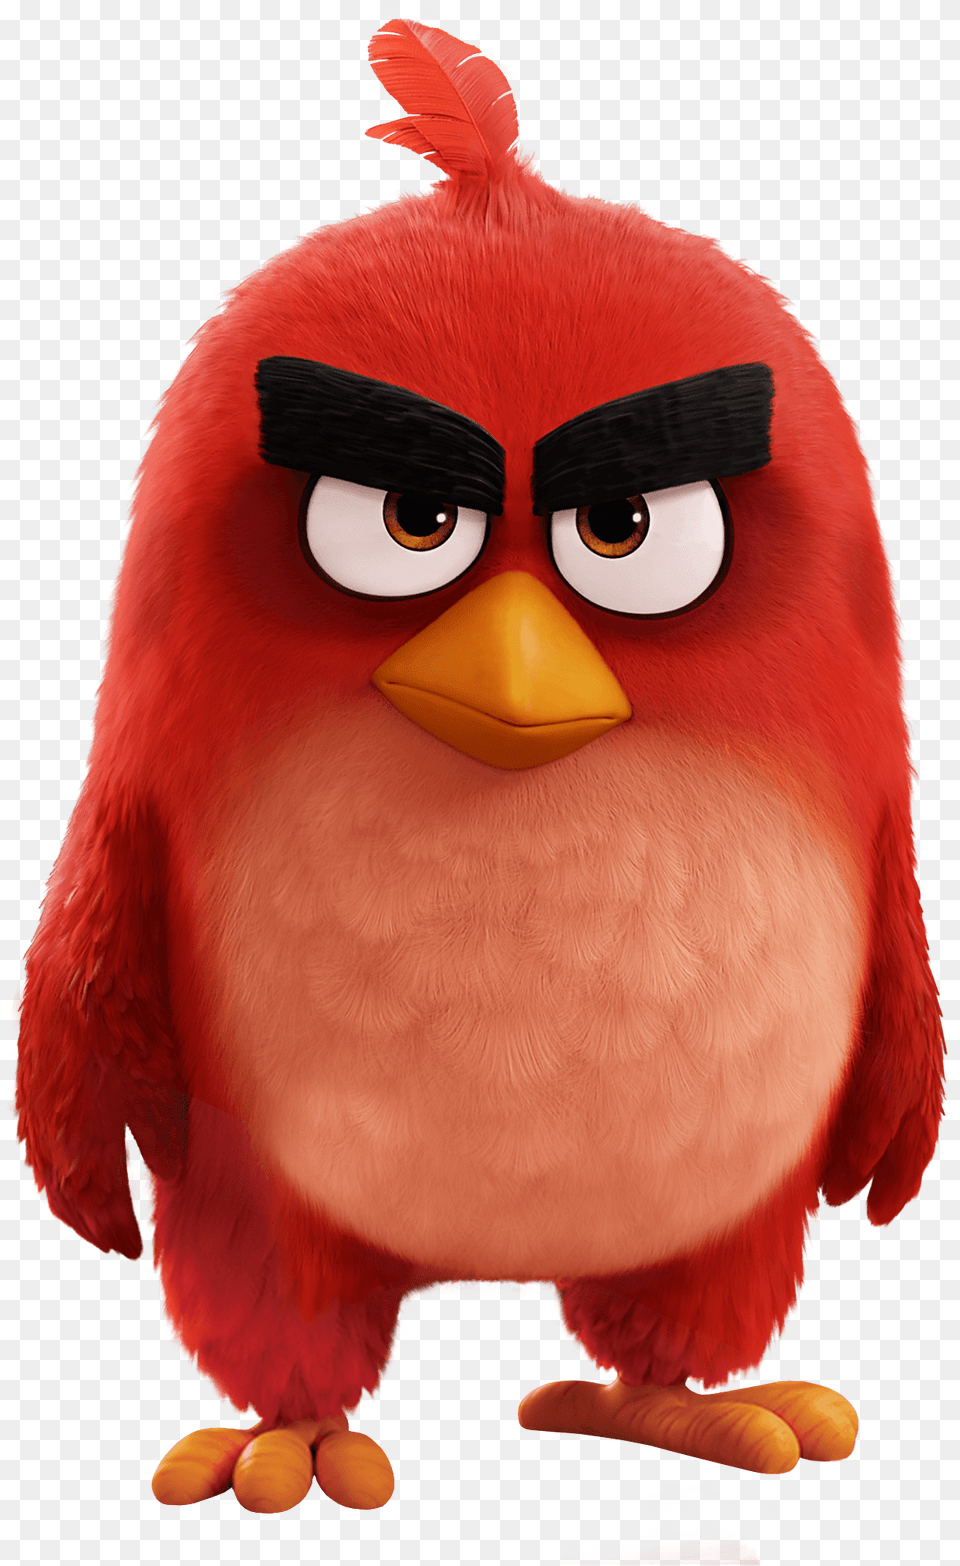 Angry Bird Movie Red Bird Clipart Download Angry Birds 2 Red, Animal, Beak Png Image